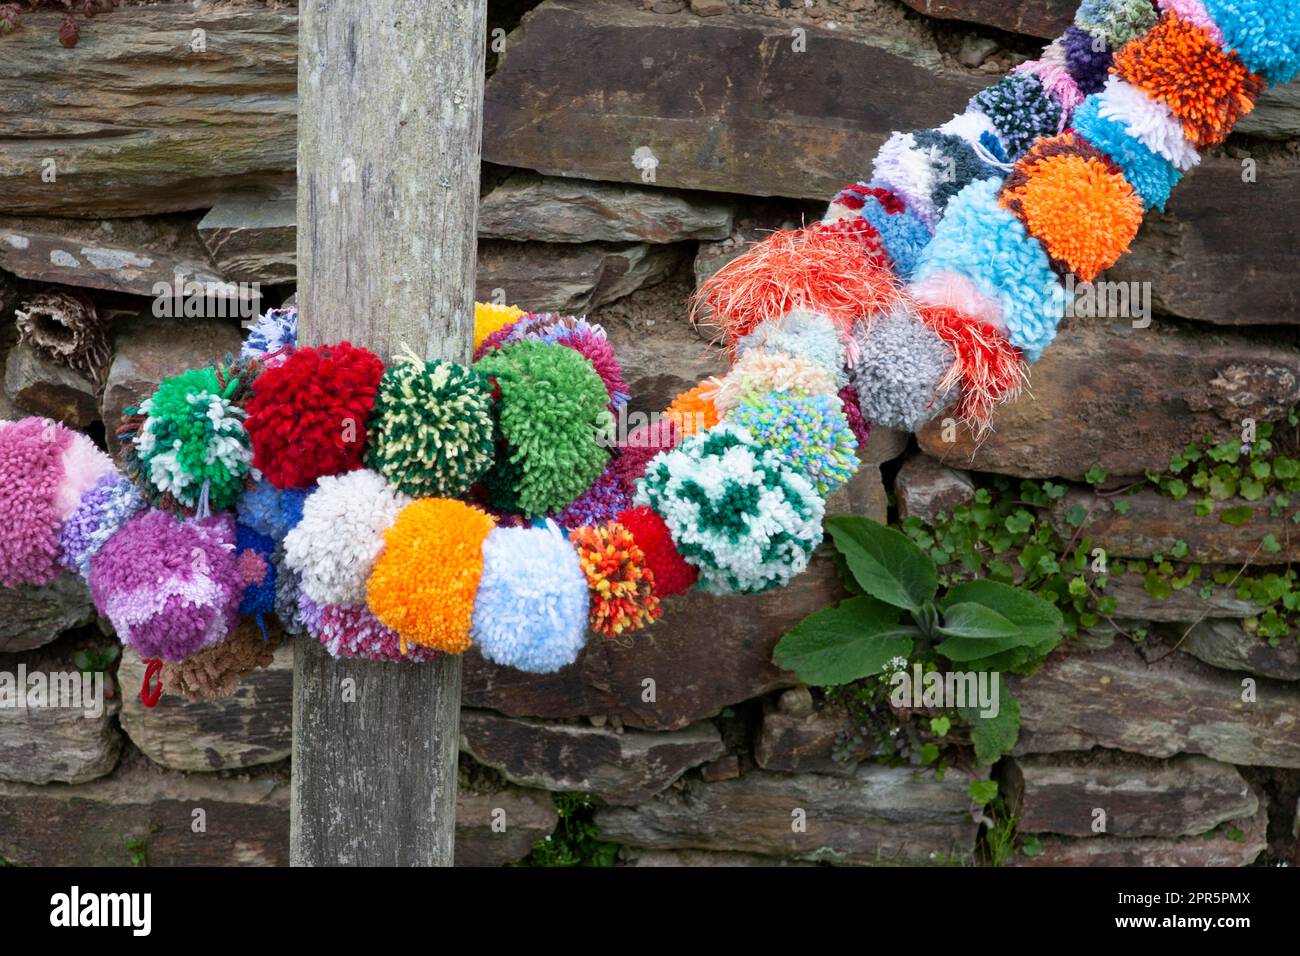 Dry stone wall and colourful pom-poms: RHS Rosemoor, Devon, UK Stock Photo